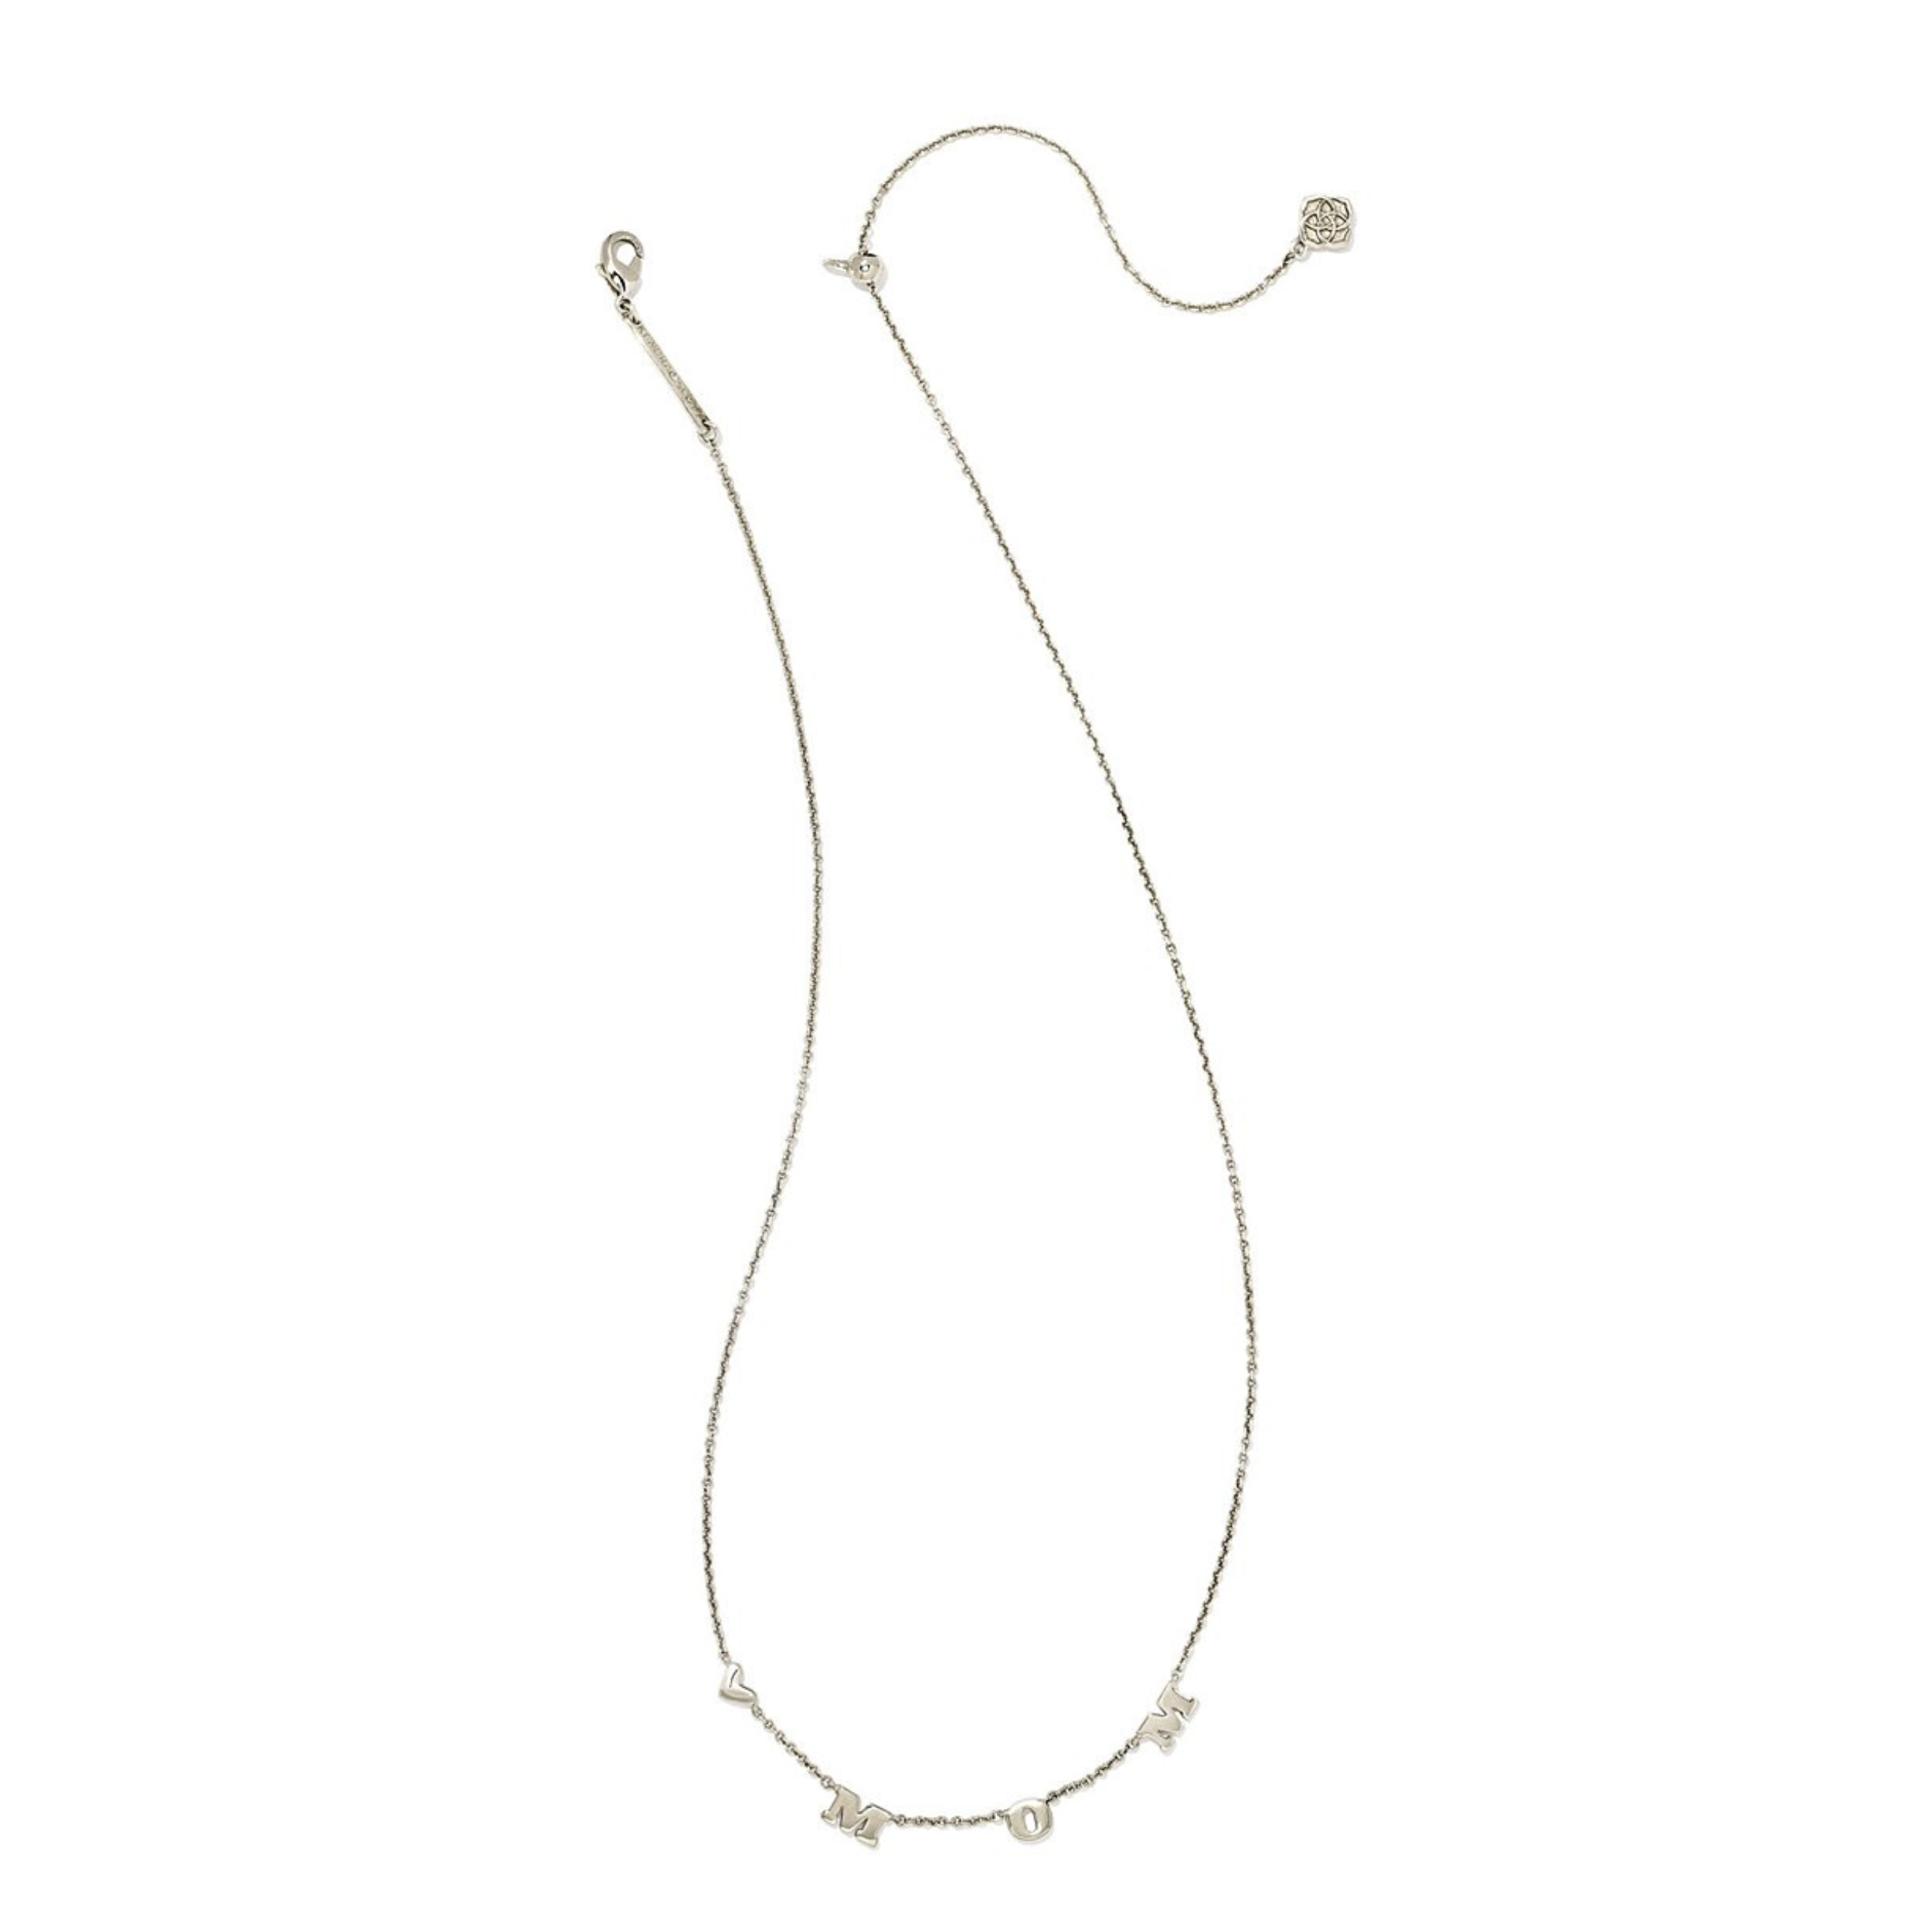 Kendra Scott | Kendra Scott Mom Pendant Strand Necklace in Silver - Giddy Up Glamour Boutique